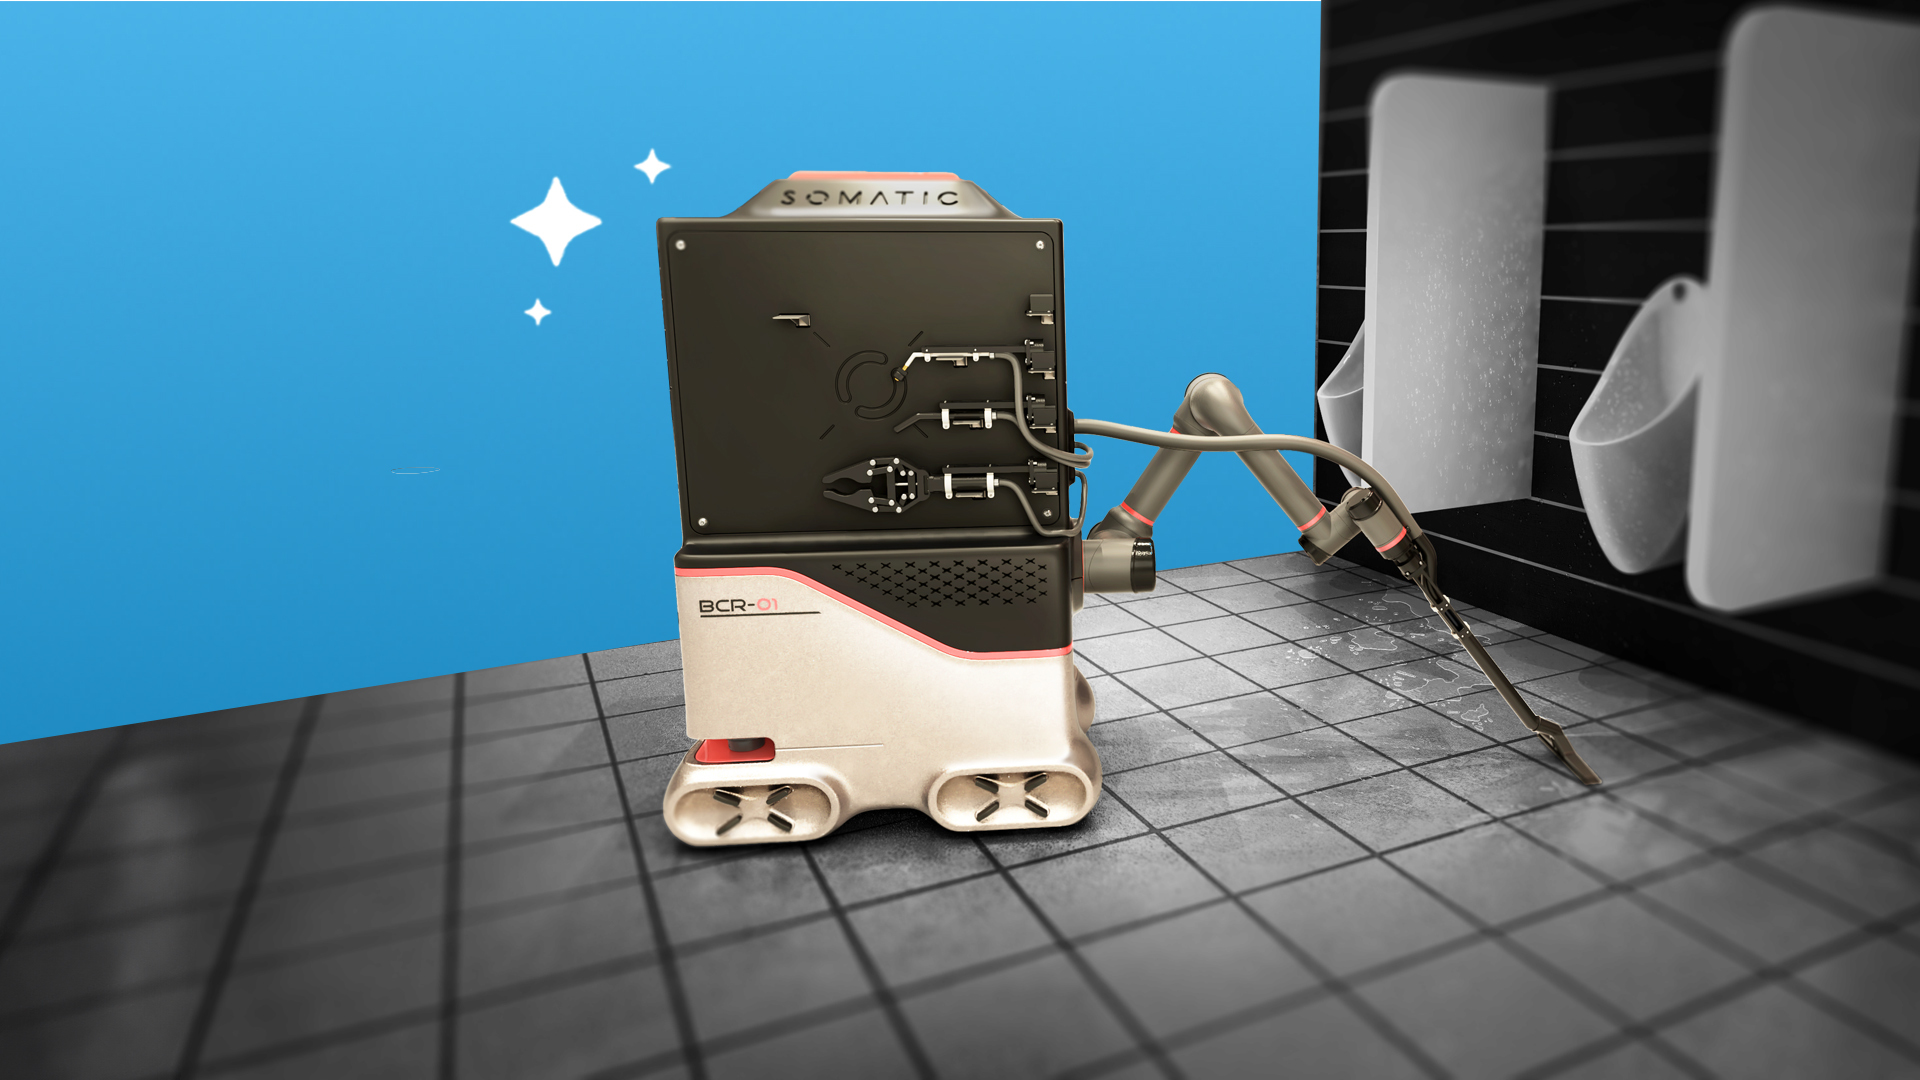 Somatic Cleaning Robot